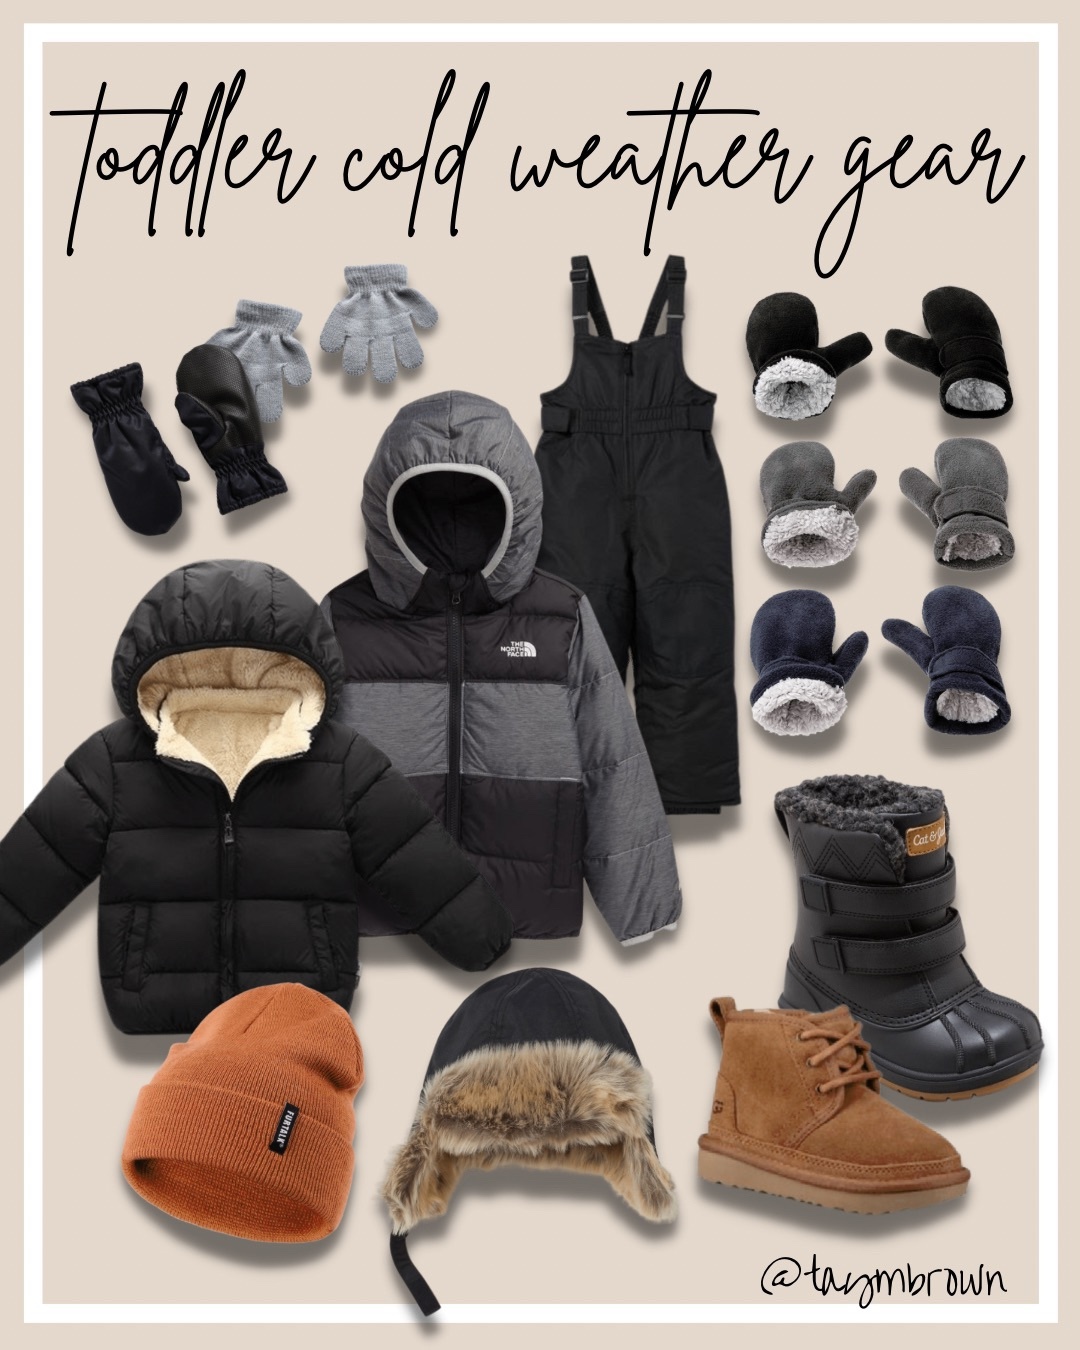 Cold Weather Gear for the Family - The Styled Press